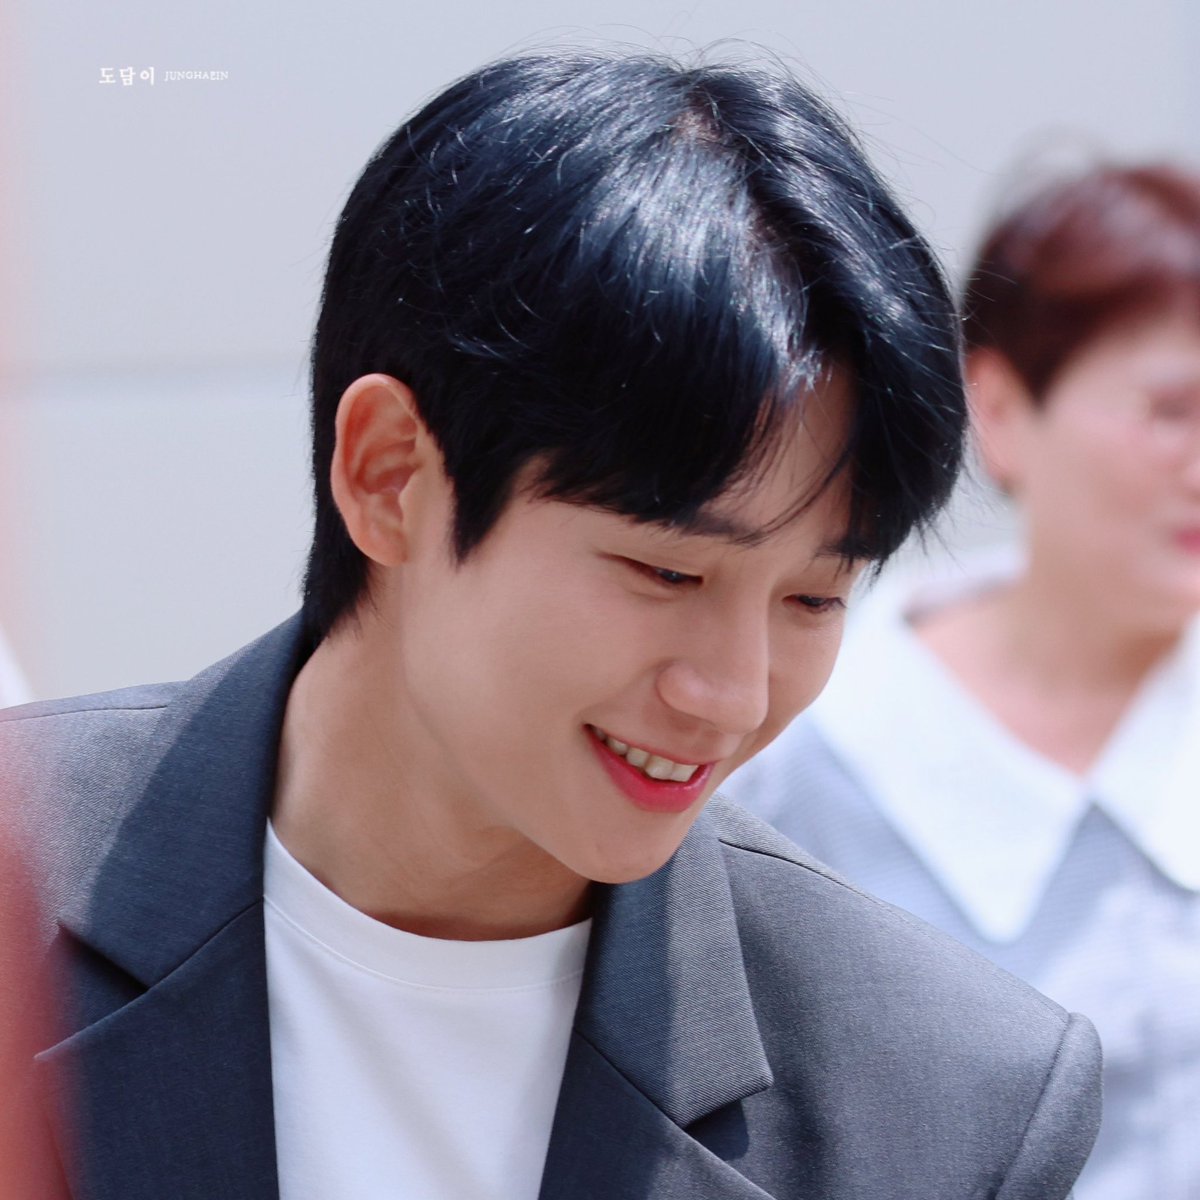 Giving is not just about making a donation.  It is
about making a difference.

#JungHaeIn  @ActorHaein